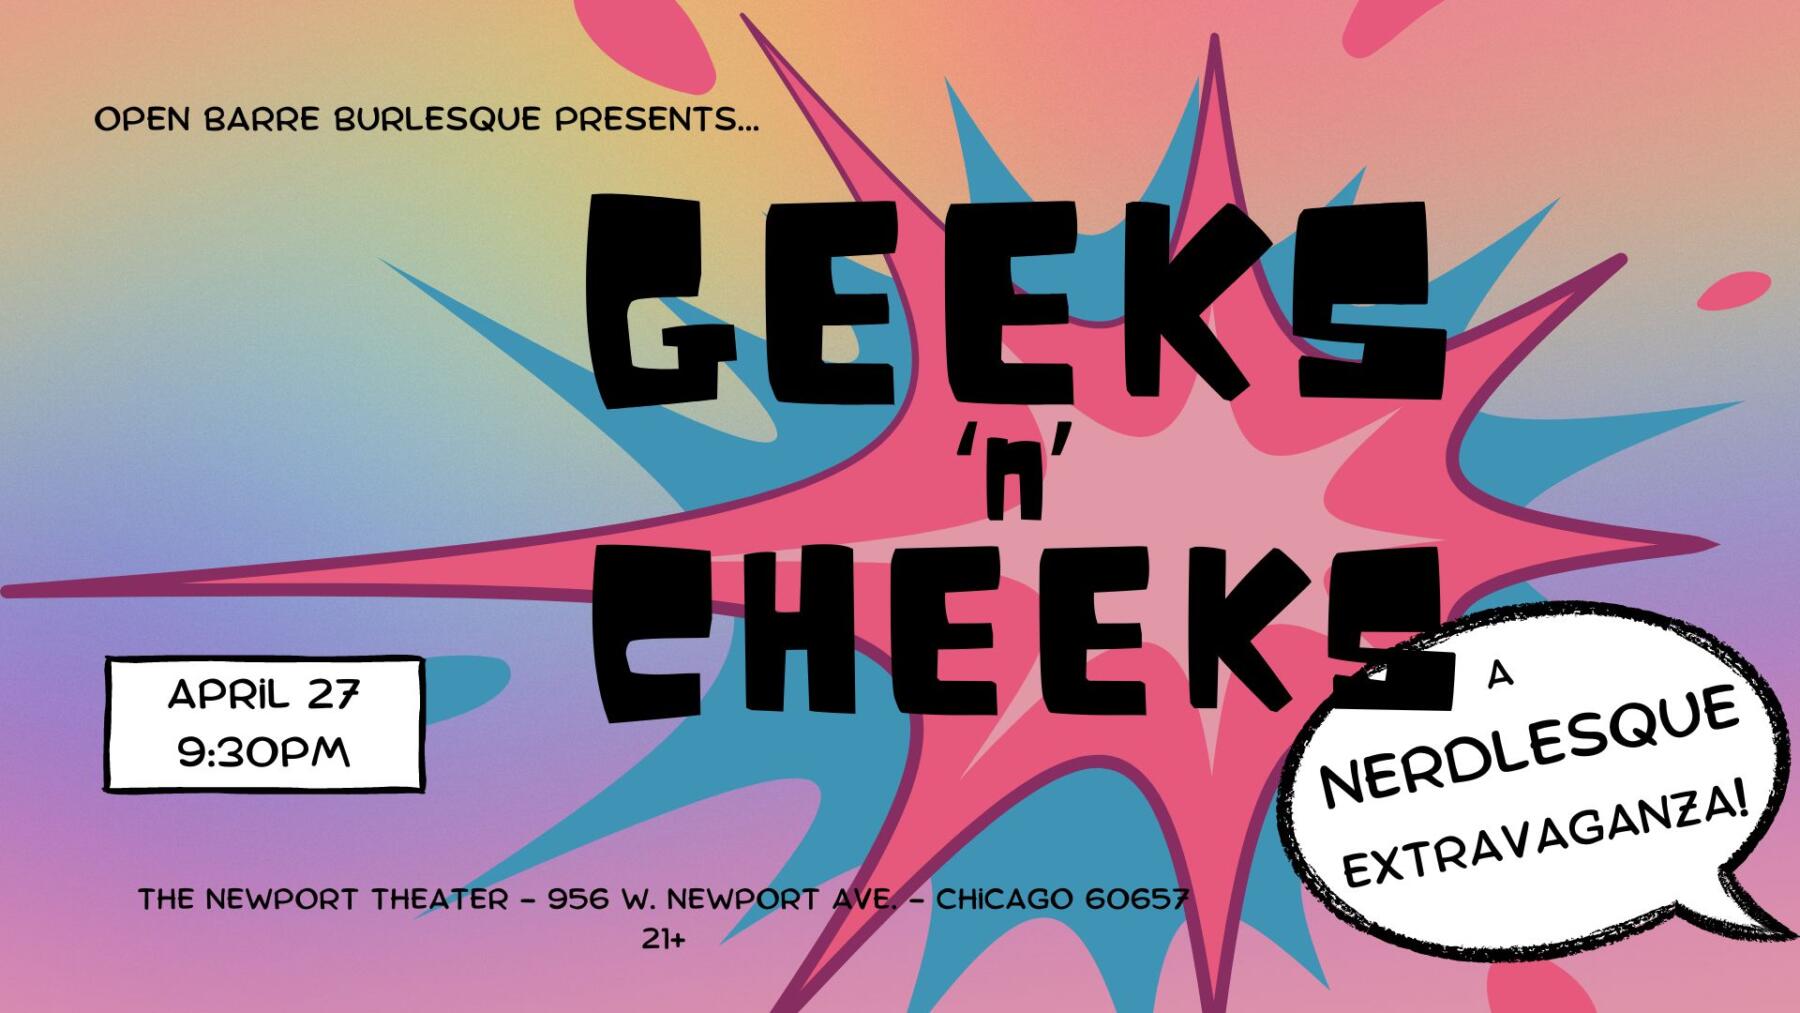 Geeks’n’Cheeks FB Event Cover (1920 x 1080 px)